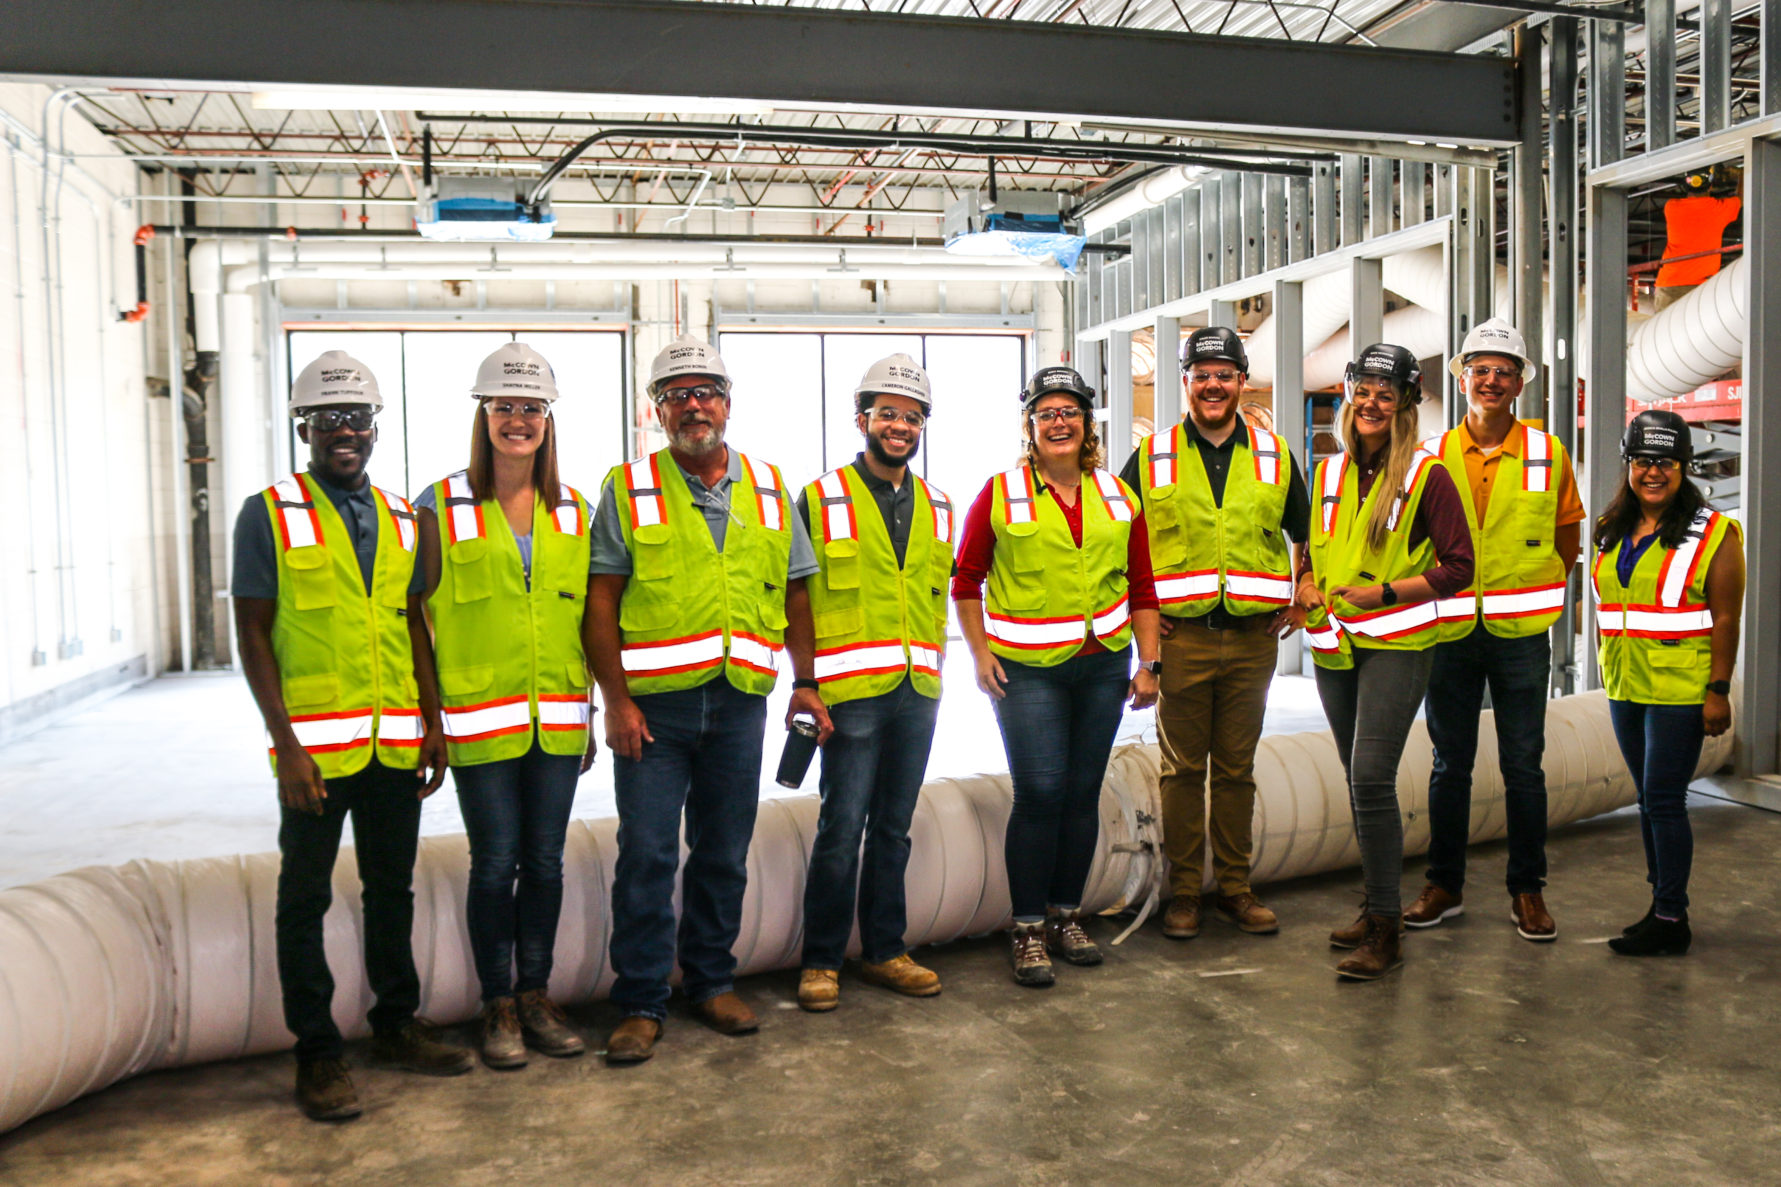 McCownGordon's past interns who are now associates at a construction site